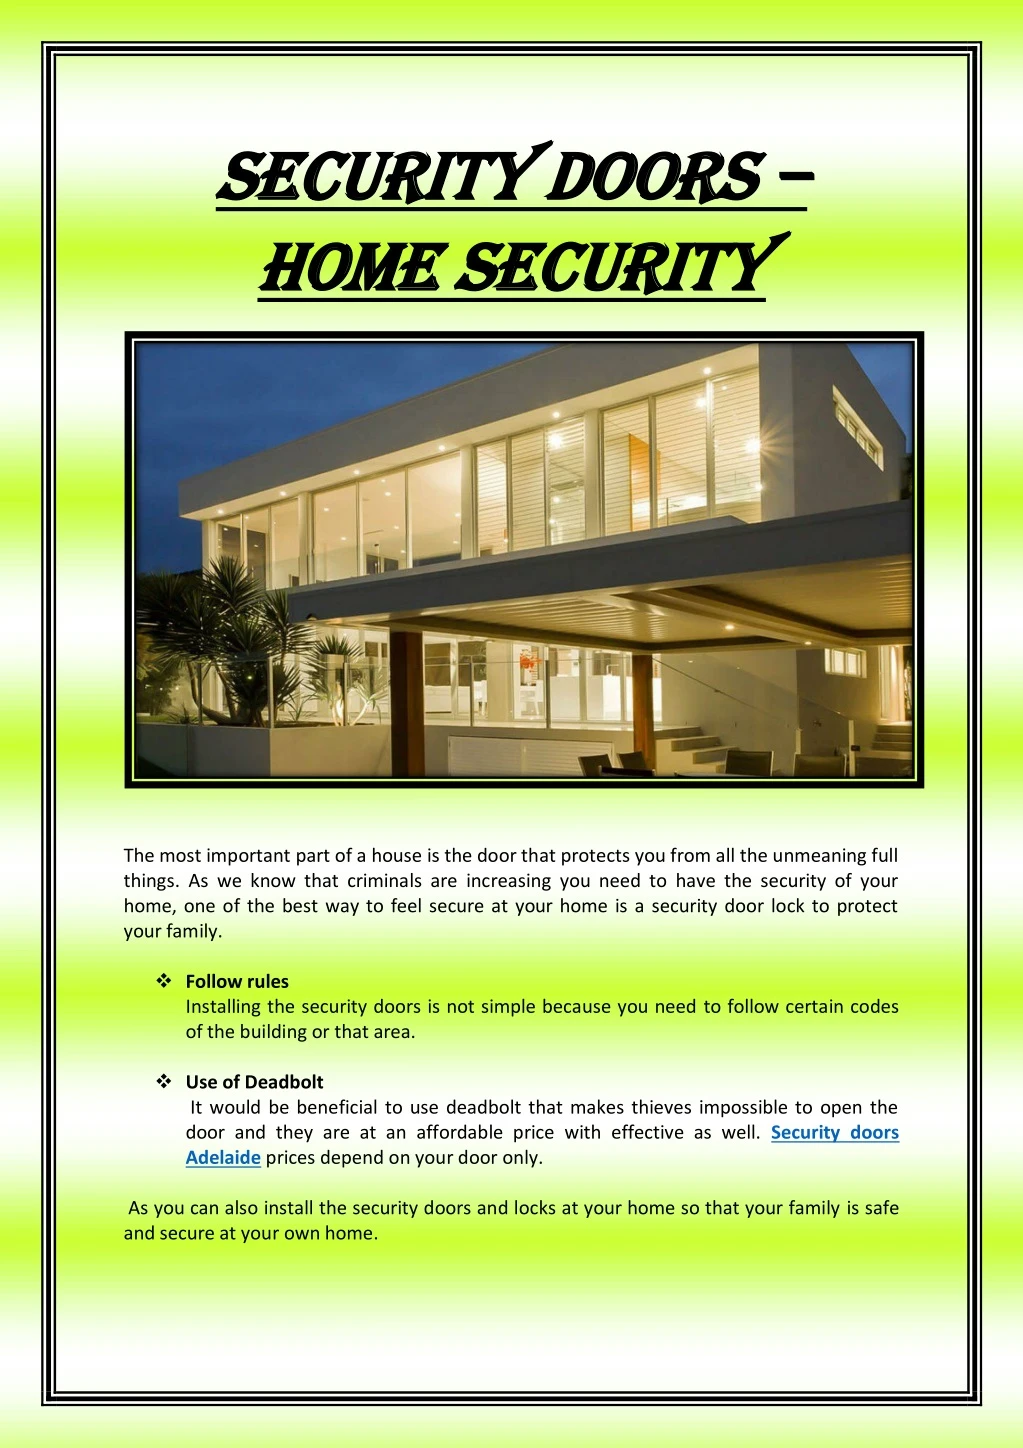 security do security doors h home ome s security